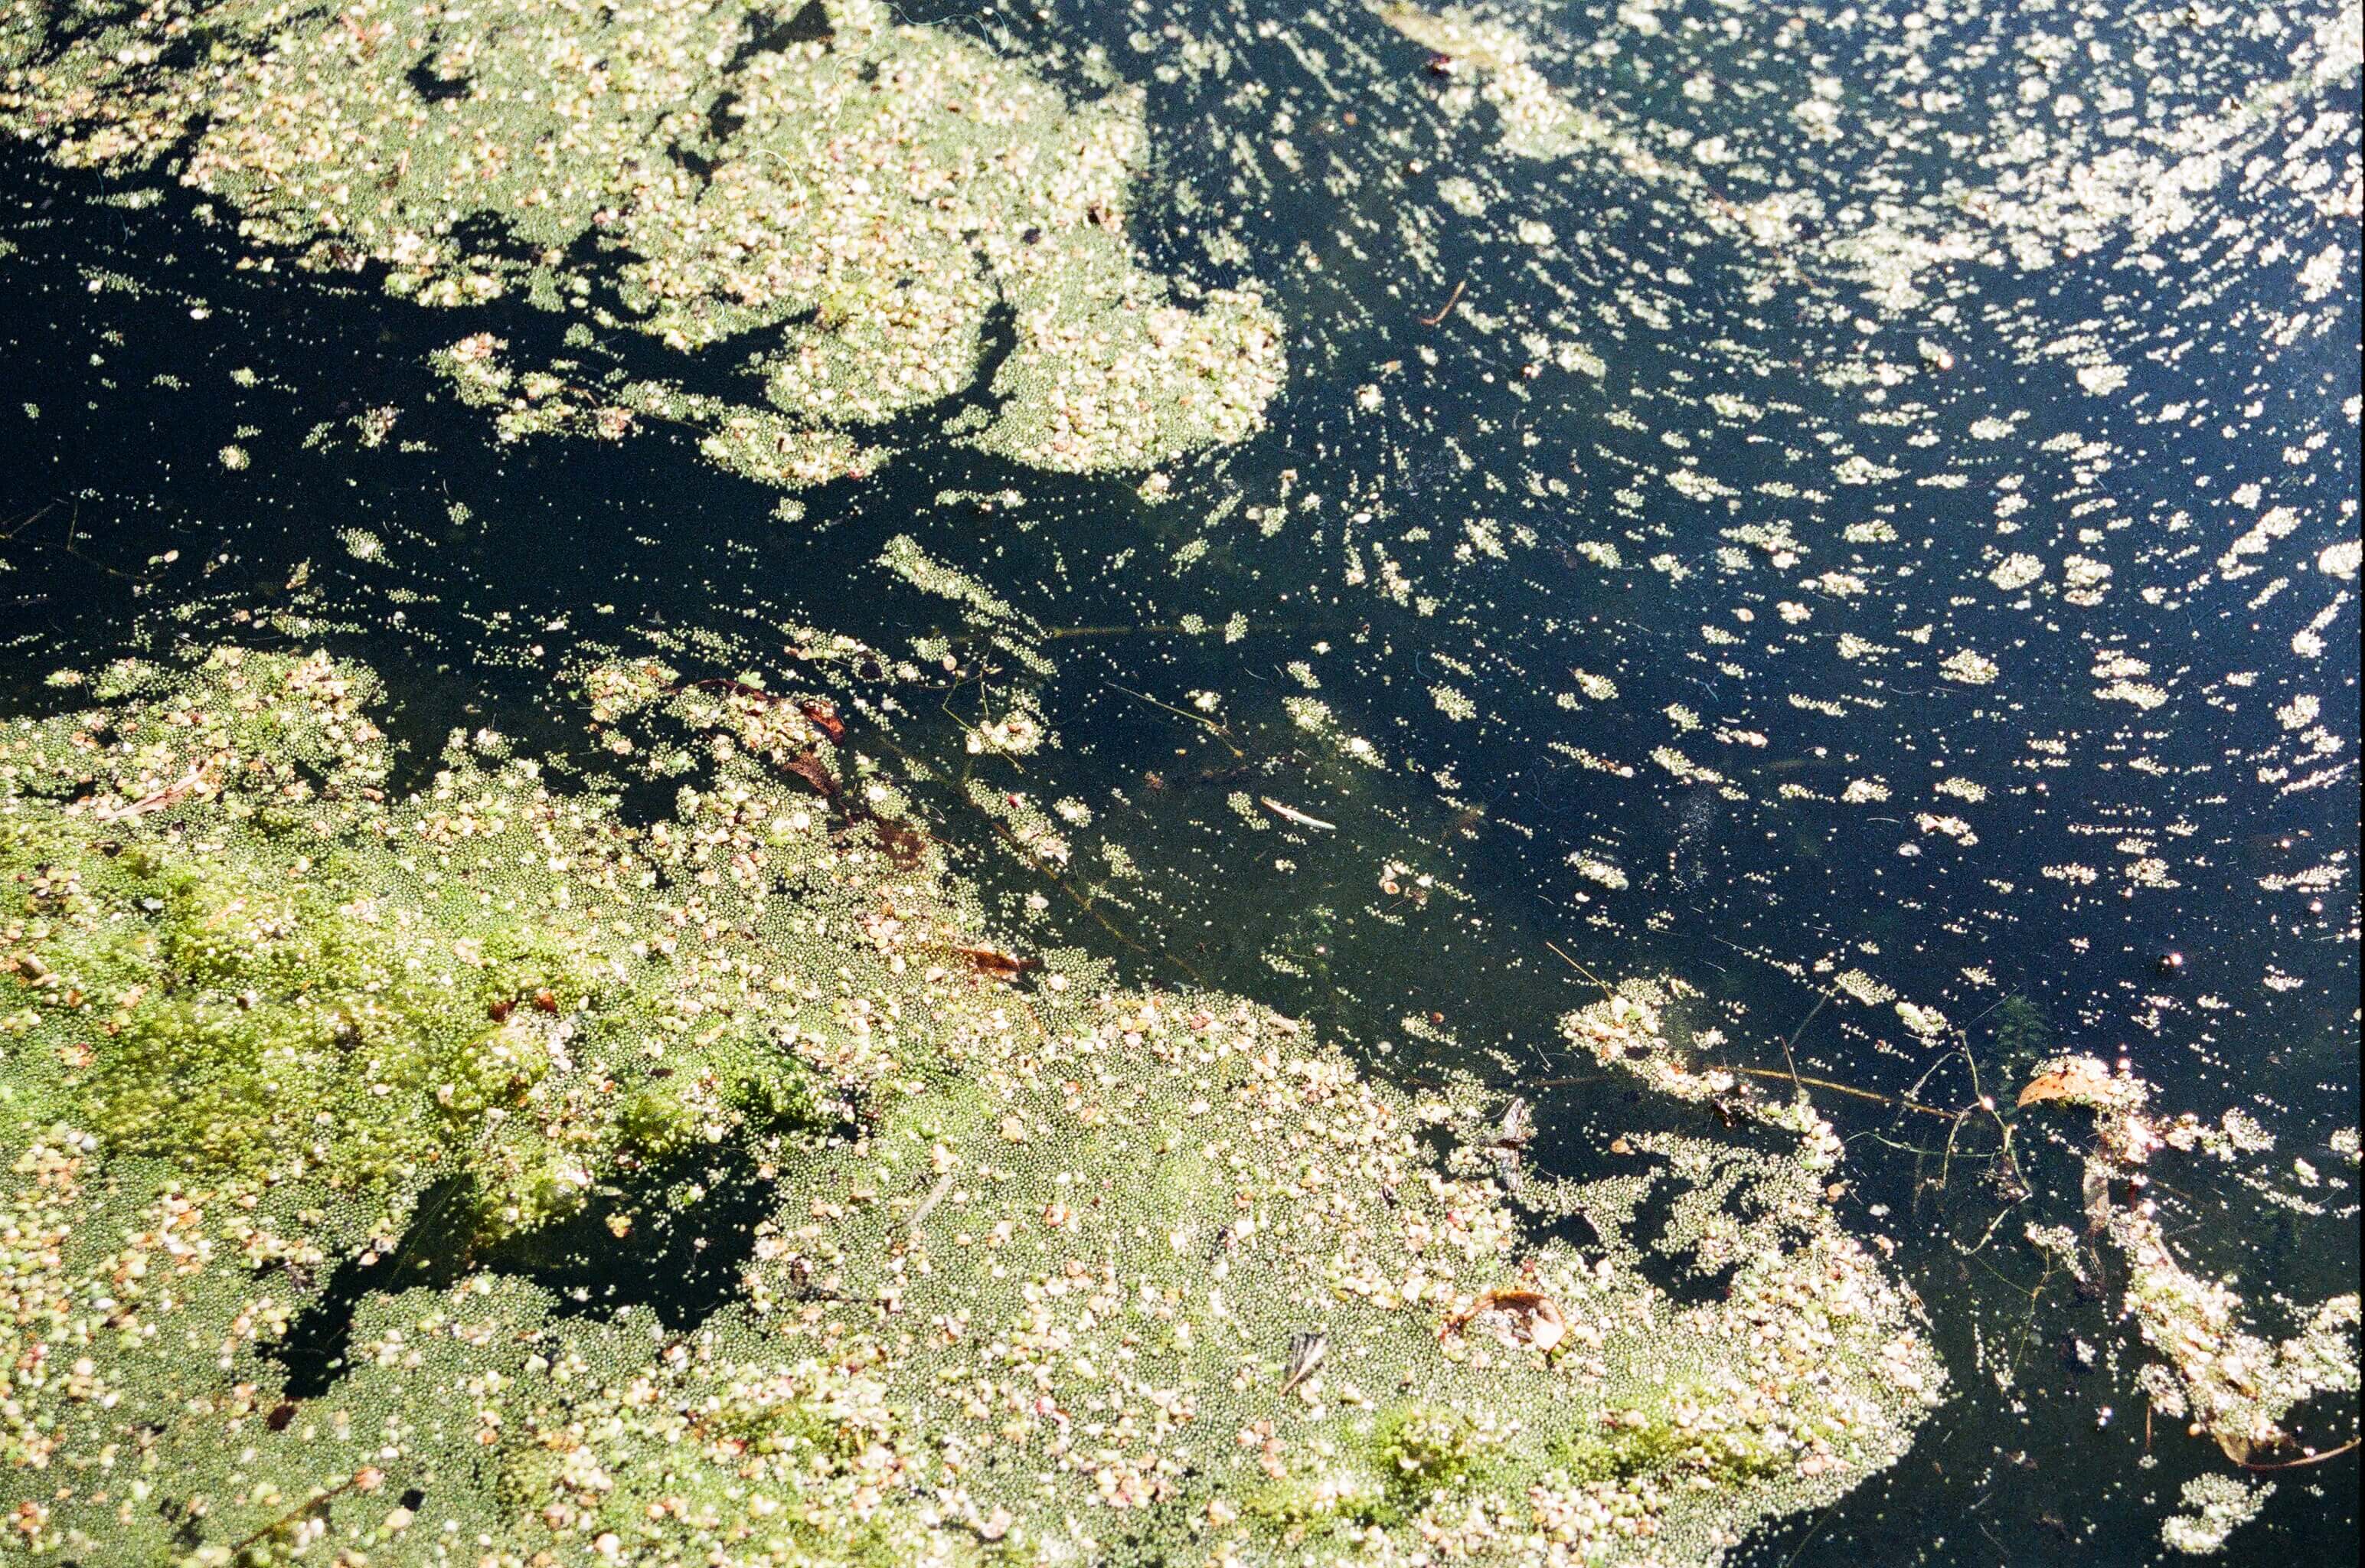 Scum on the surface of a pond in summer sunlight